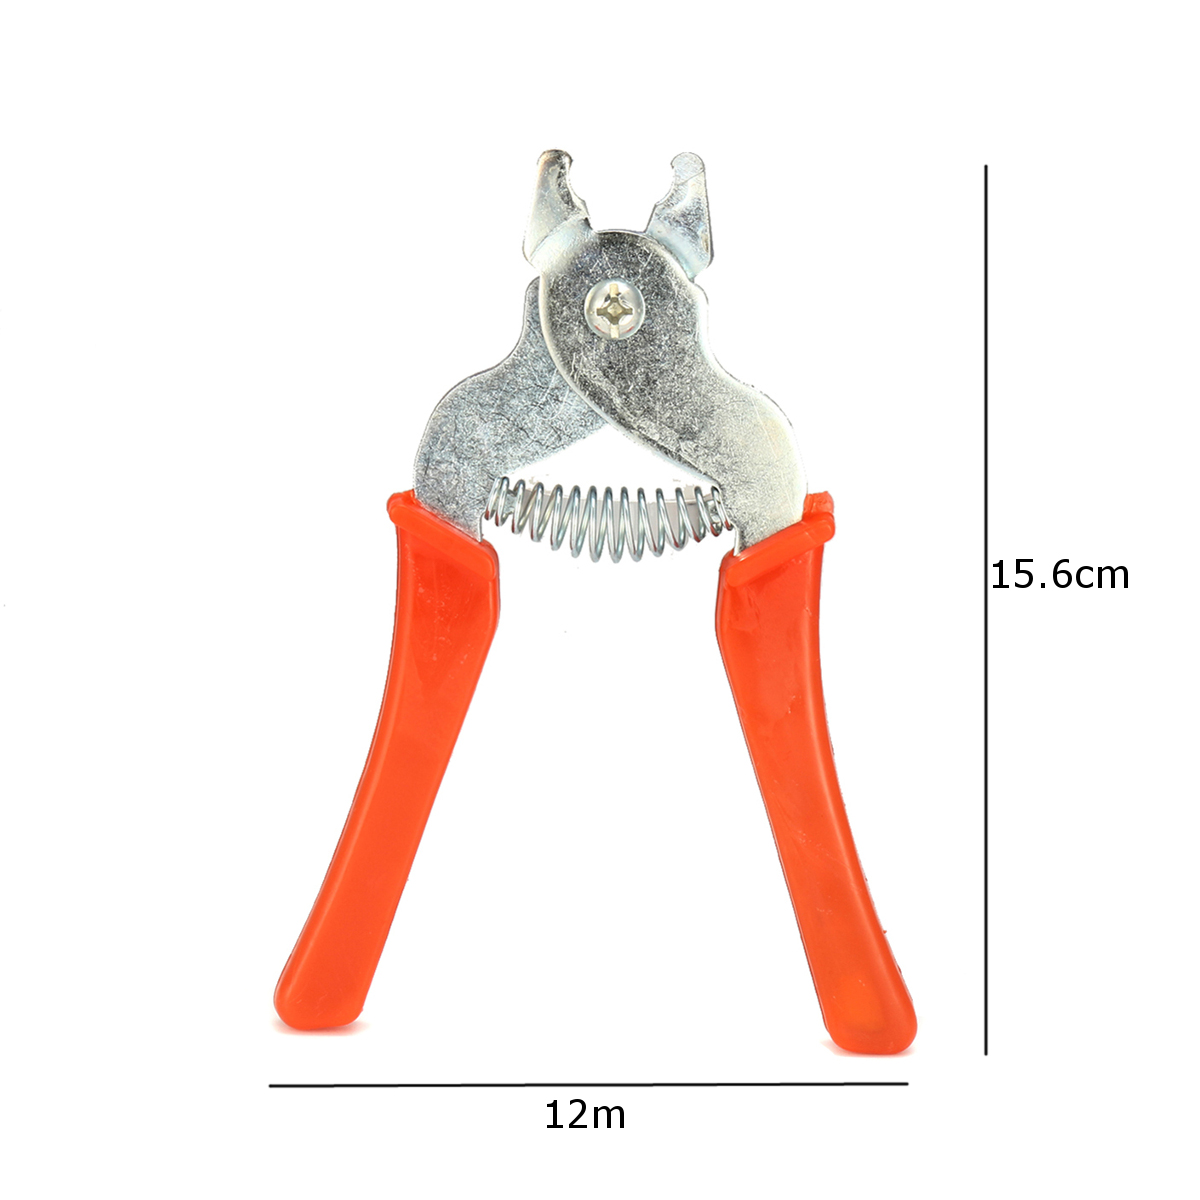 Hog ring pliers tool m clip staples bird chicken mesh cage wire fencing ...